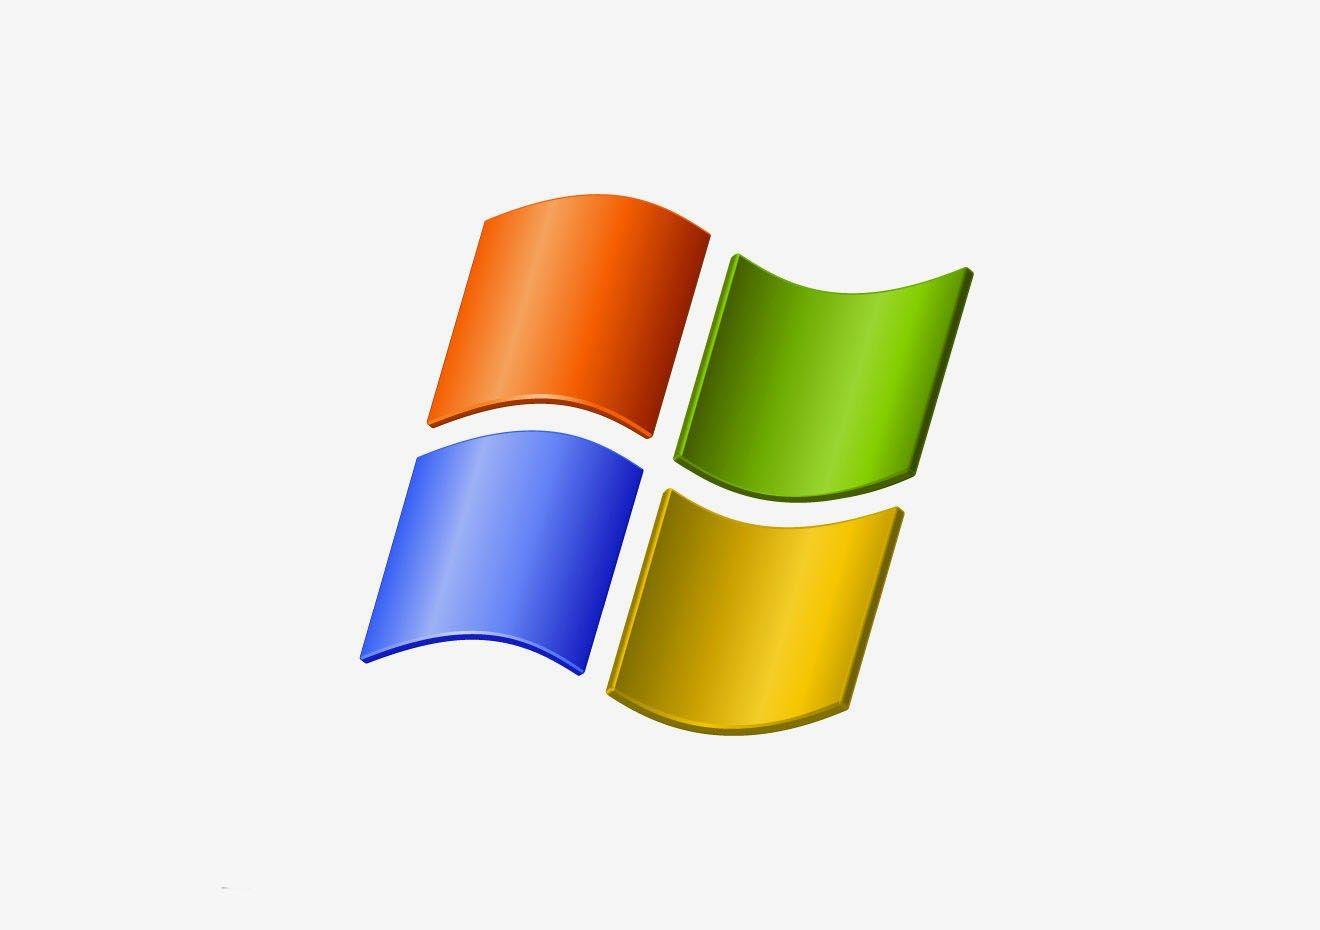 Windows 2001 Logo - Windows XP Makes Ransomware and Other Threats So Much Worse | WIRED